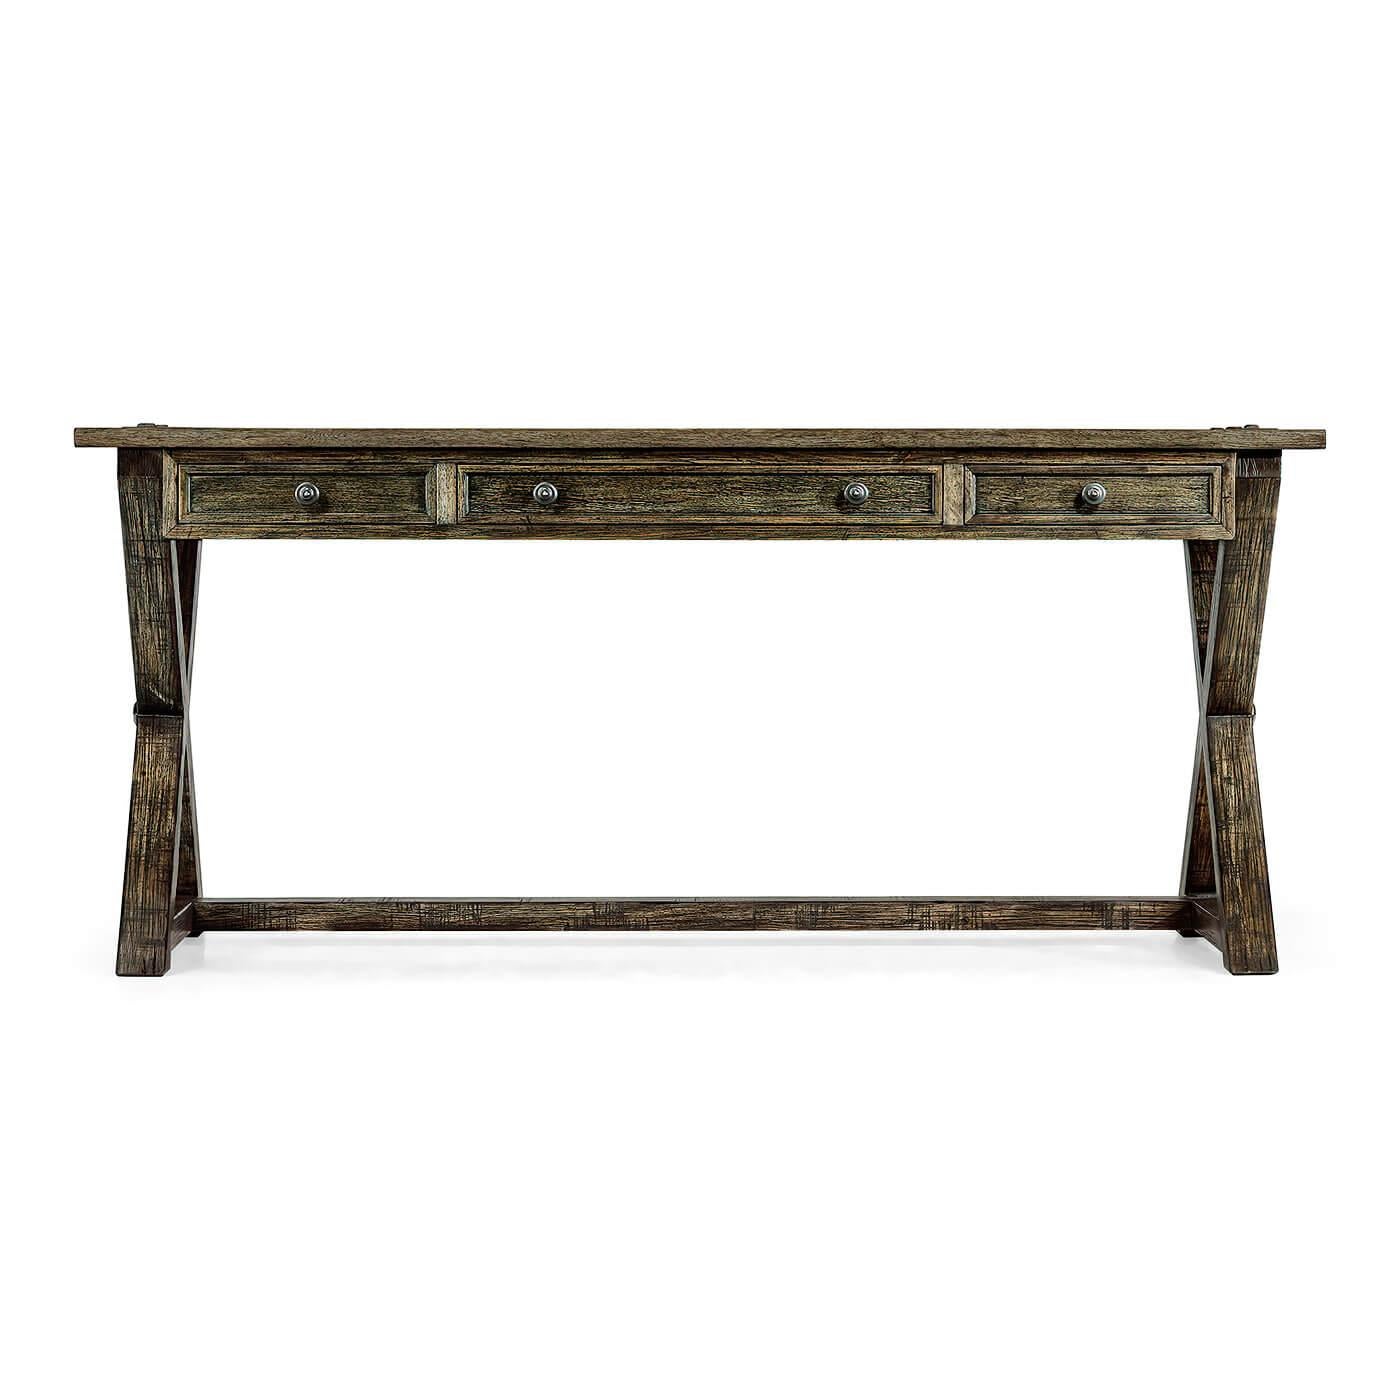 A rustic country-style solid driftwood finished rectangular desk with a rustic finish revealing exposed saw marks. Three small oak-lined drawers to front with mortice and tenon joints to X-frame support and top surface.

Dimensions: 68